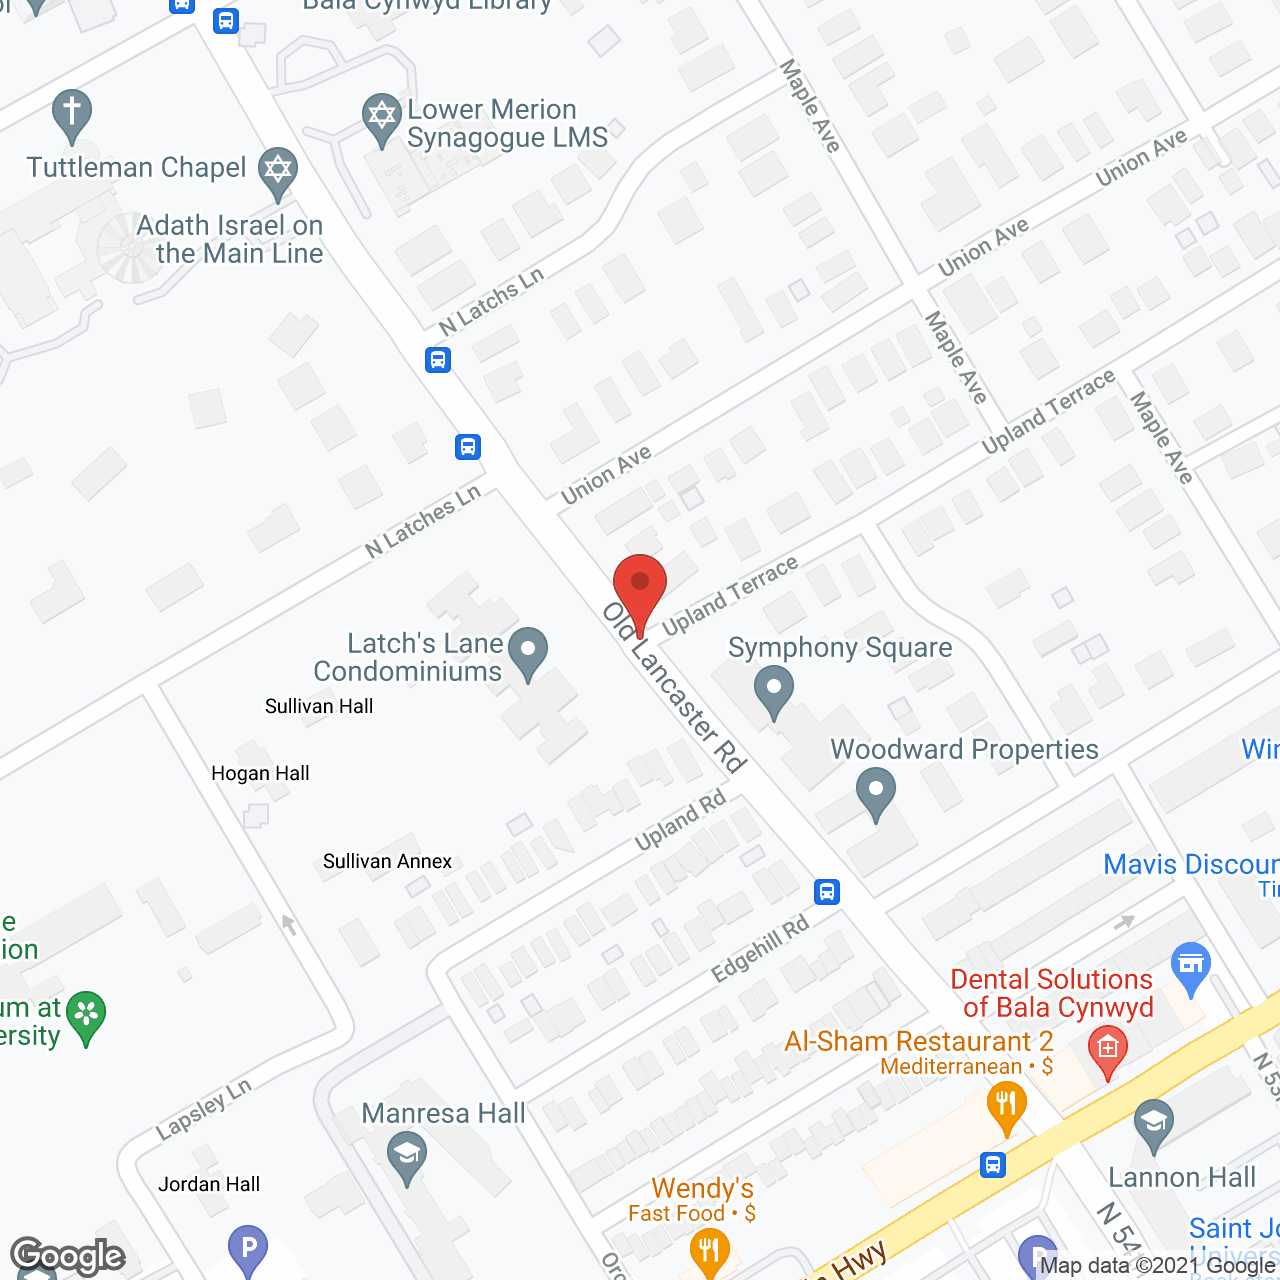 Symphony Square in google map